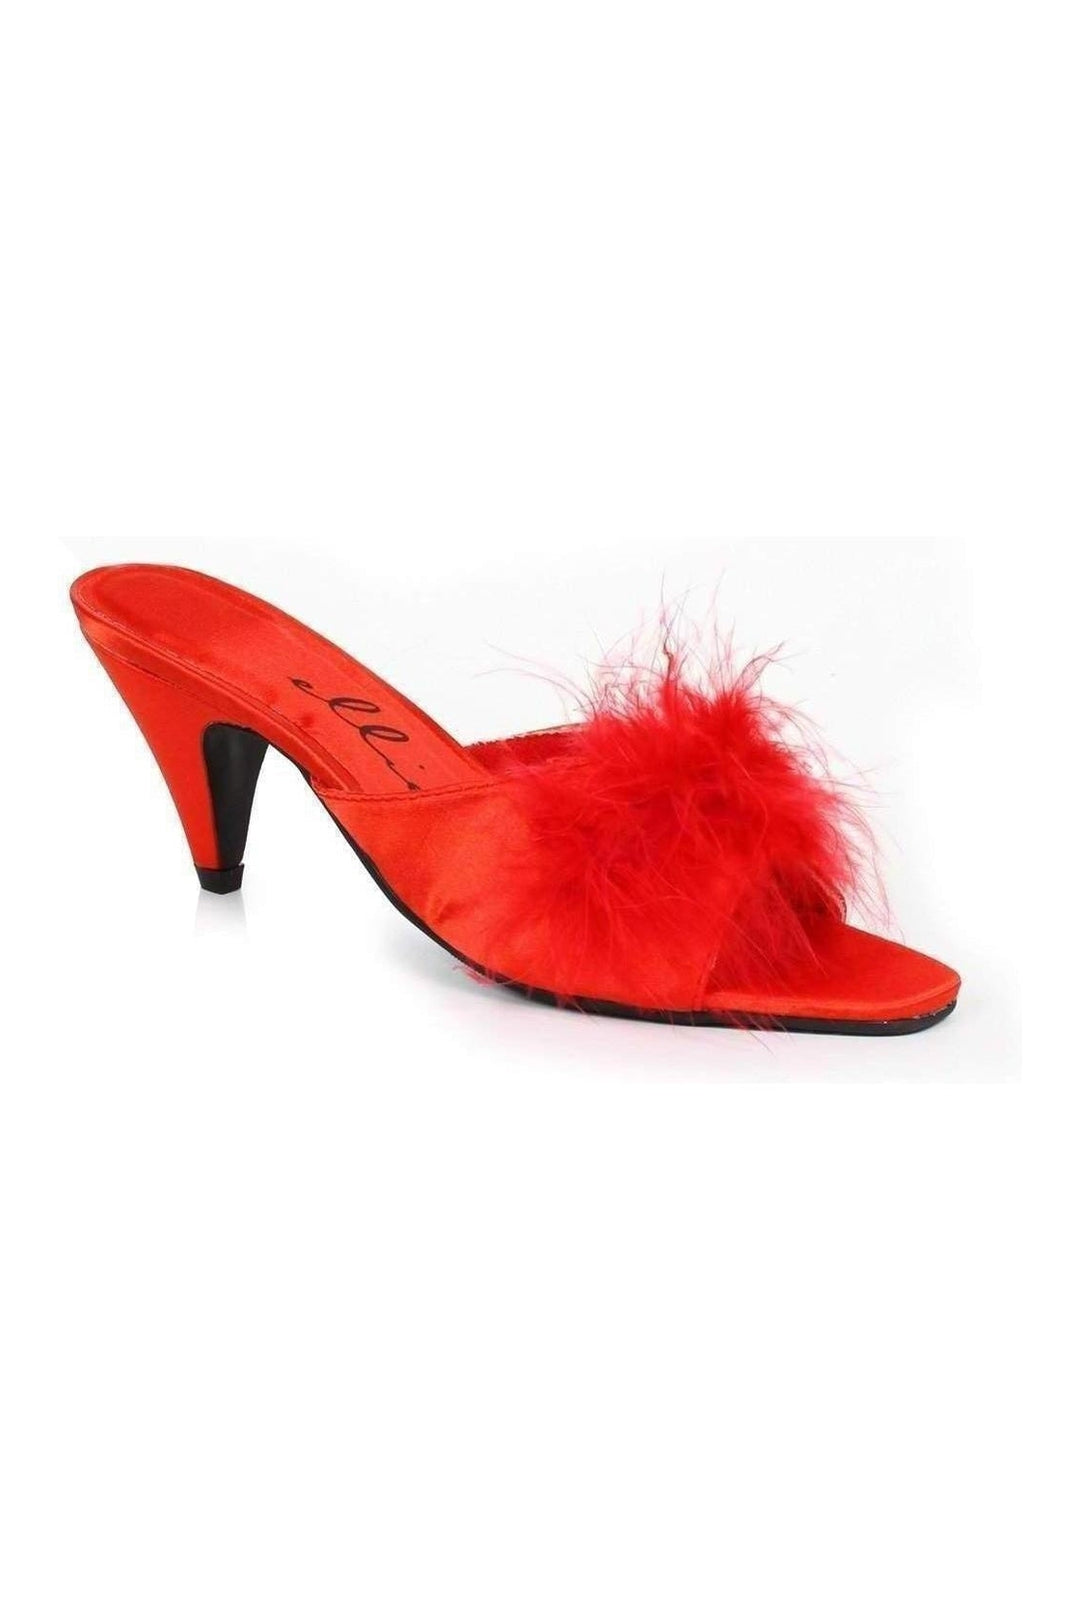 PHOEBE Marabou | Red Patent-Ellie Shoes-SEXYSHOES.COM